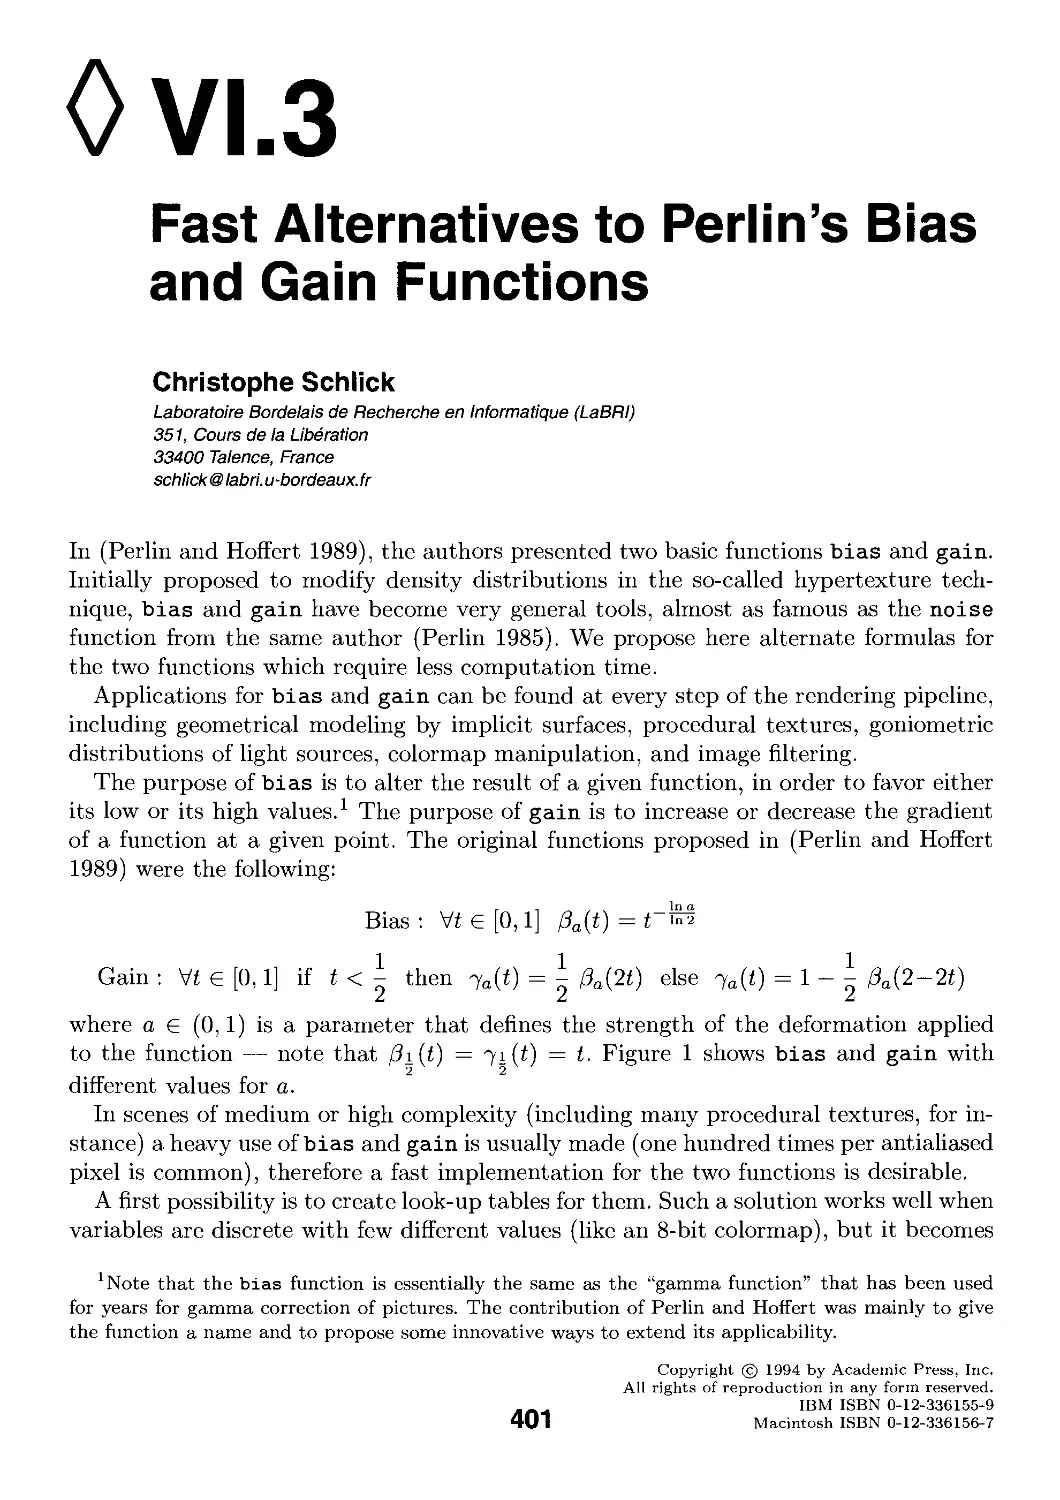 VI.3. Fast Alternatives to Perlin's Bias and Gain Functions by Christophe Schlick .